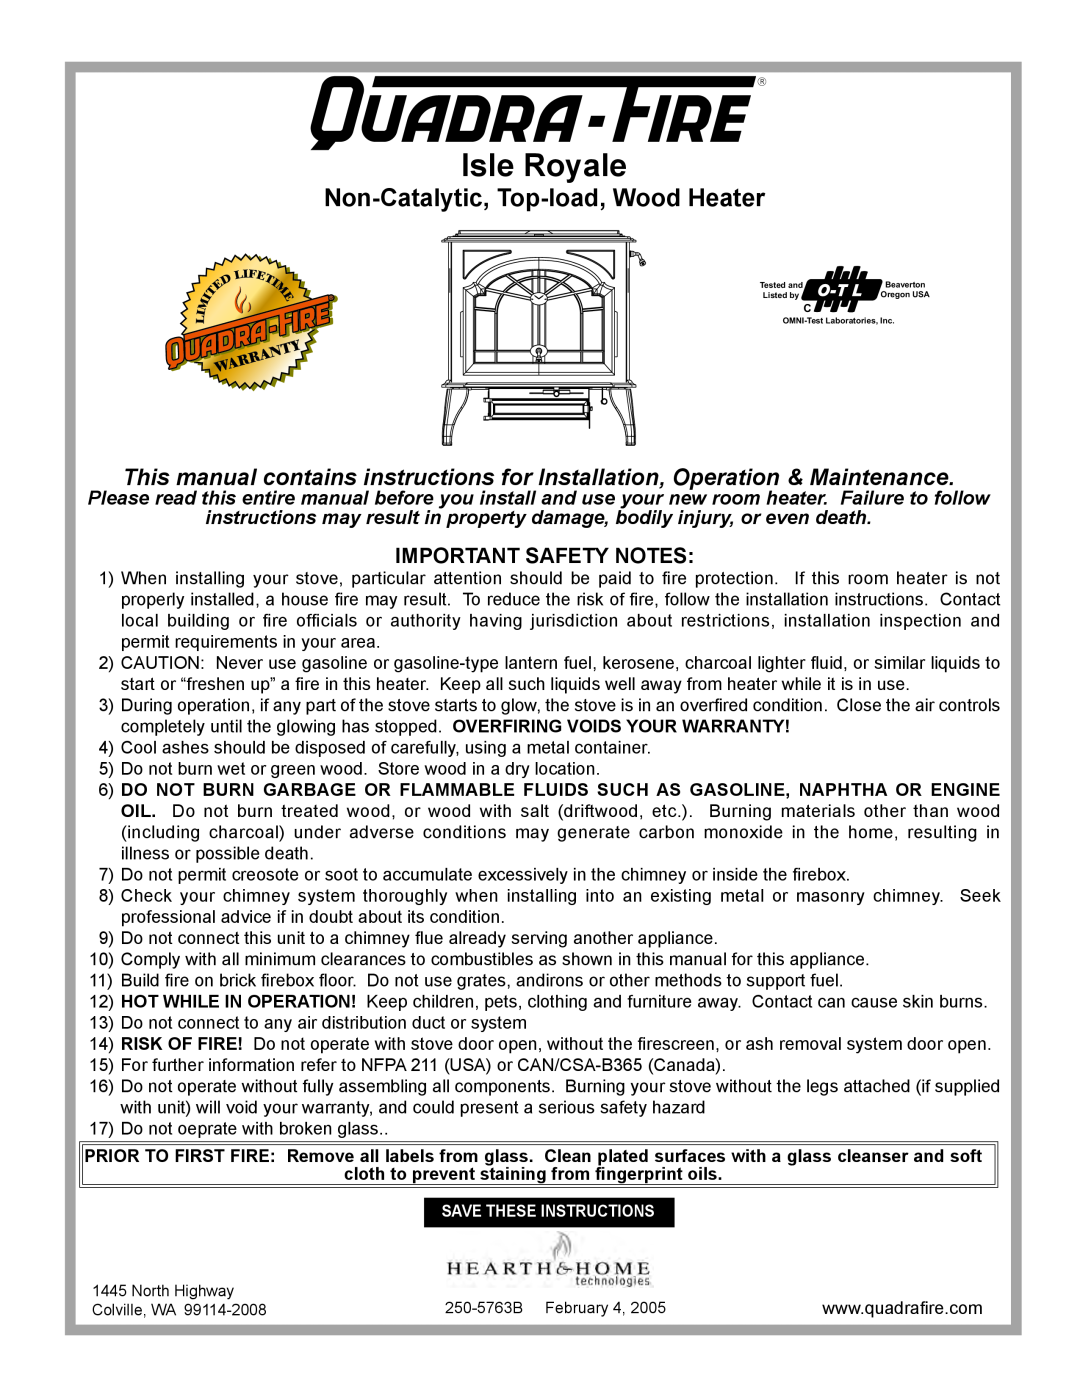 Quadra-Fire Isle Royale installation instructions Non-Catalytic, Top-load,Wood Heater, Important Safety Notes 